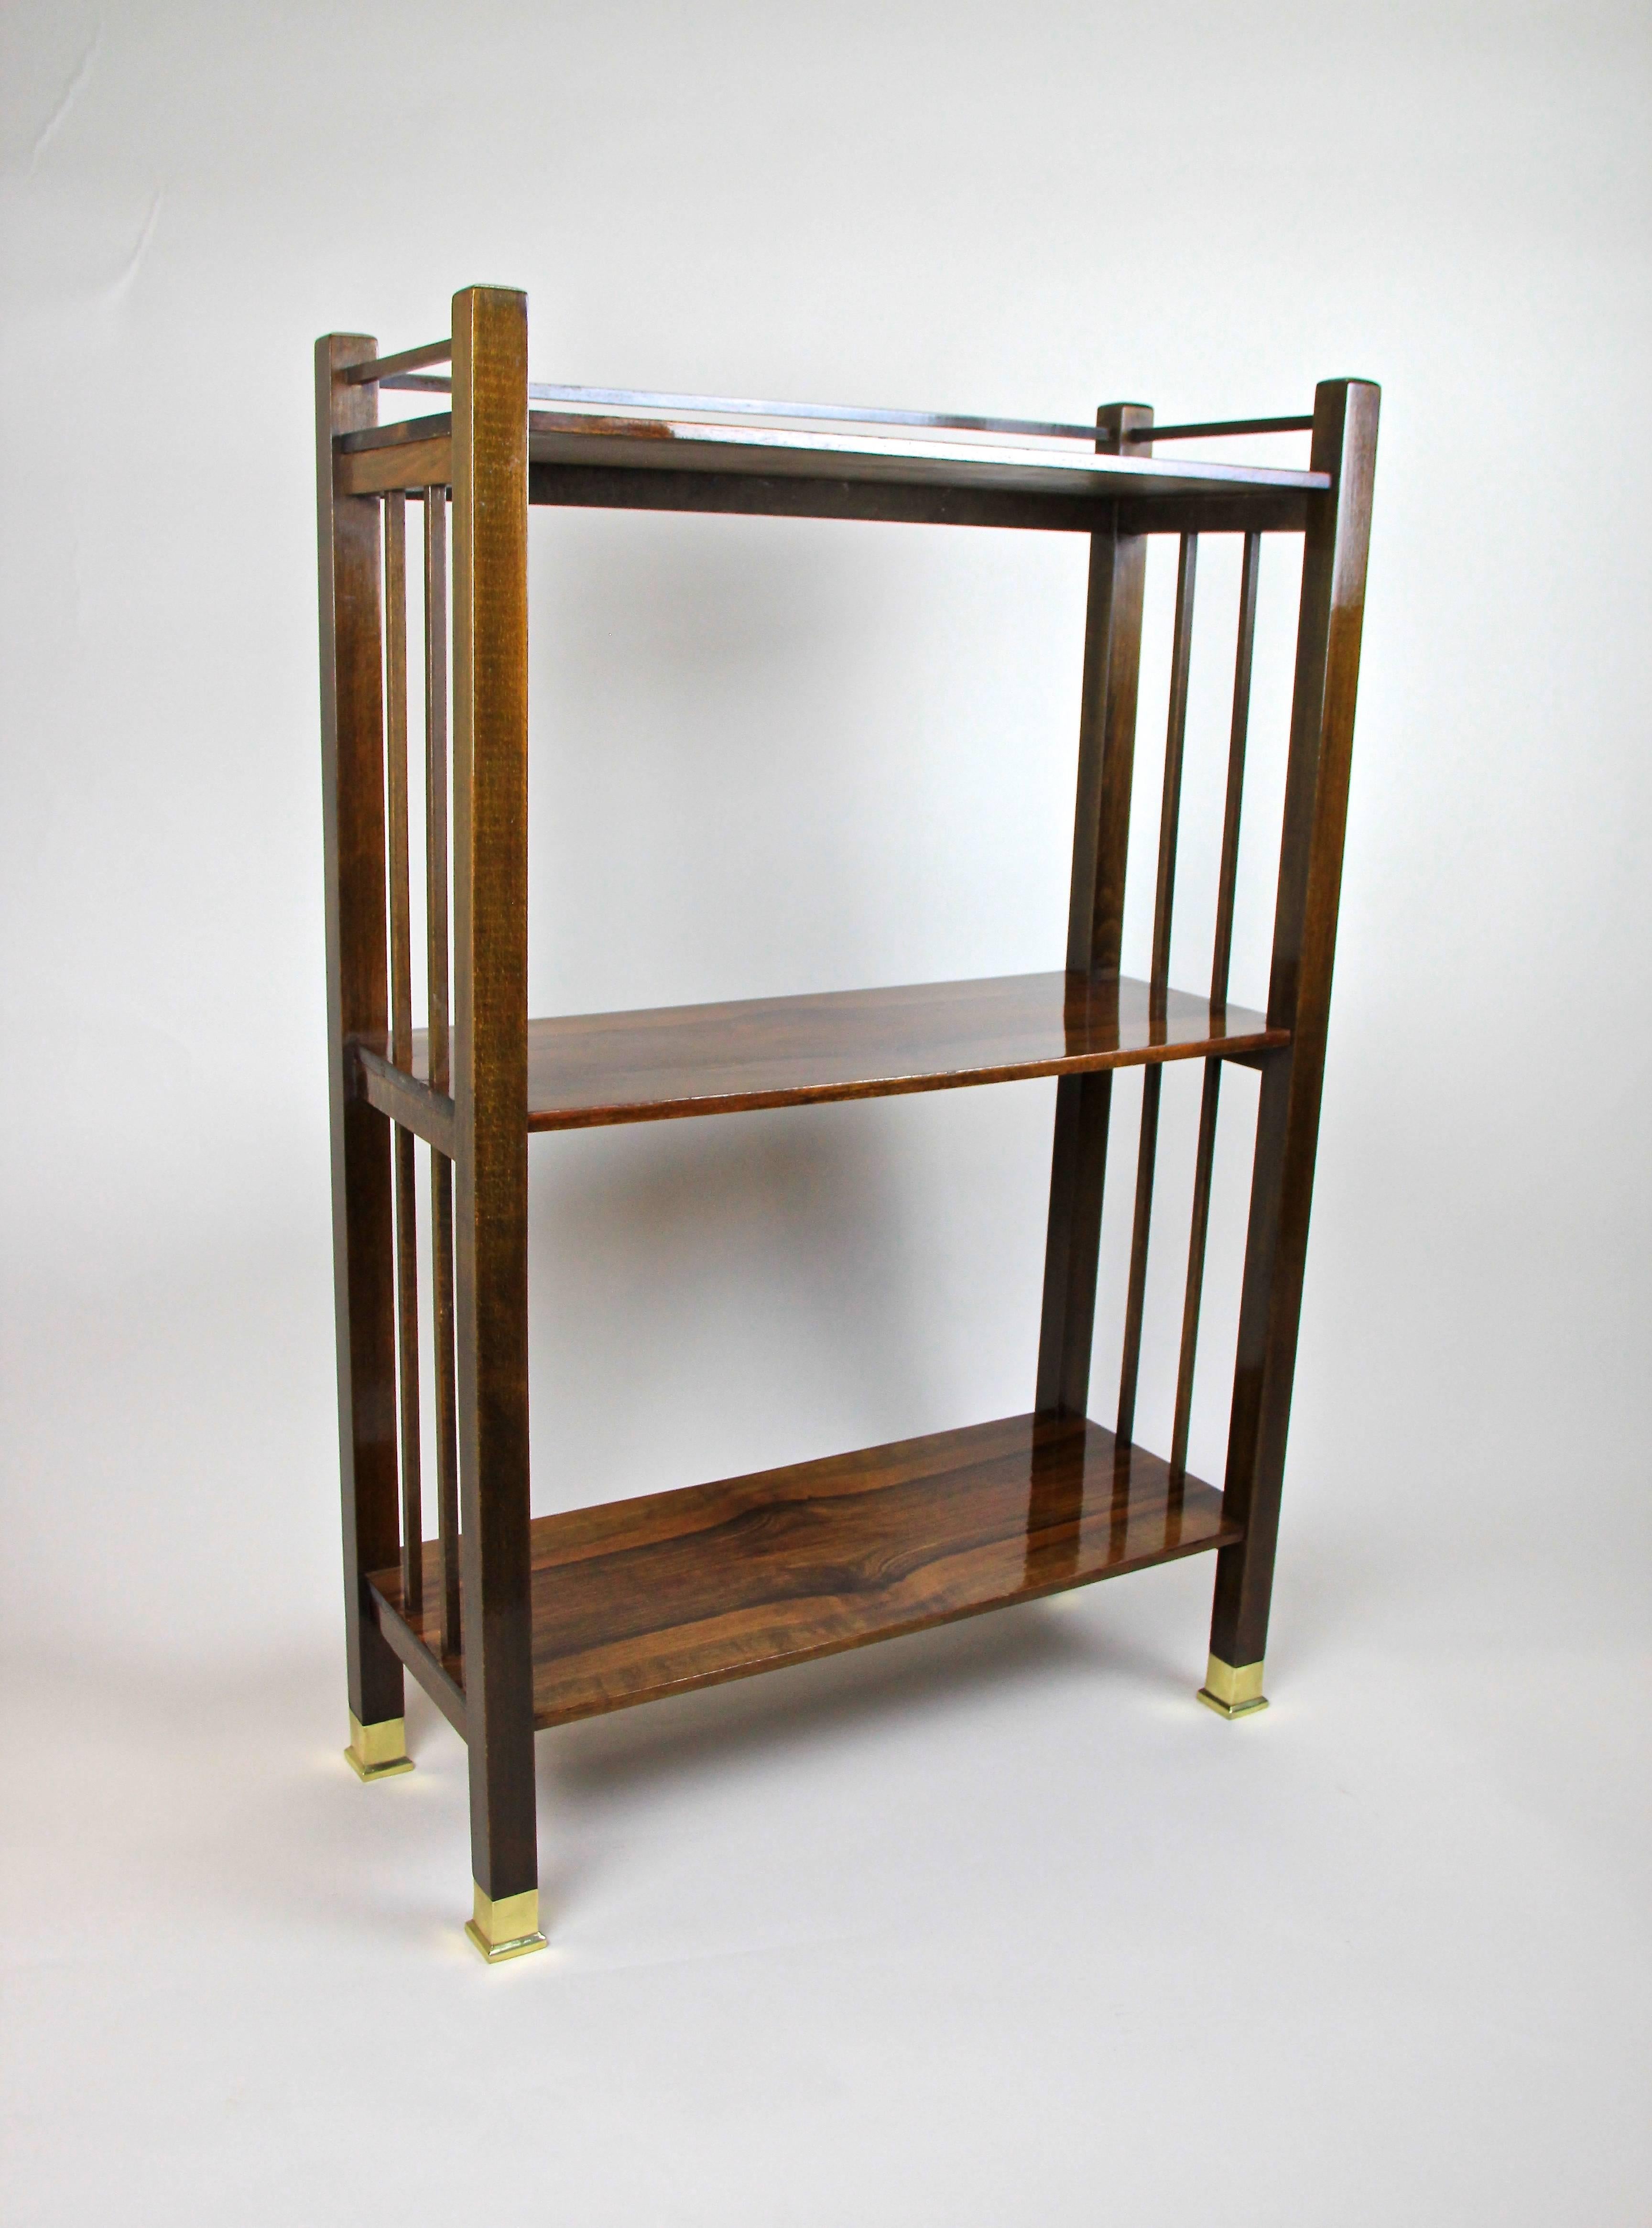 With more then 110 years of age this beautiful Art Nouveau etagere is coming from Vienna/ Austria. Made out of beech and trimmed to nut wood, this gorgeous etagere contains three shelves beautifully veneered in fine bookmatched nut wood. The clear